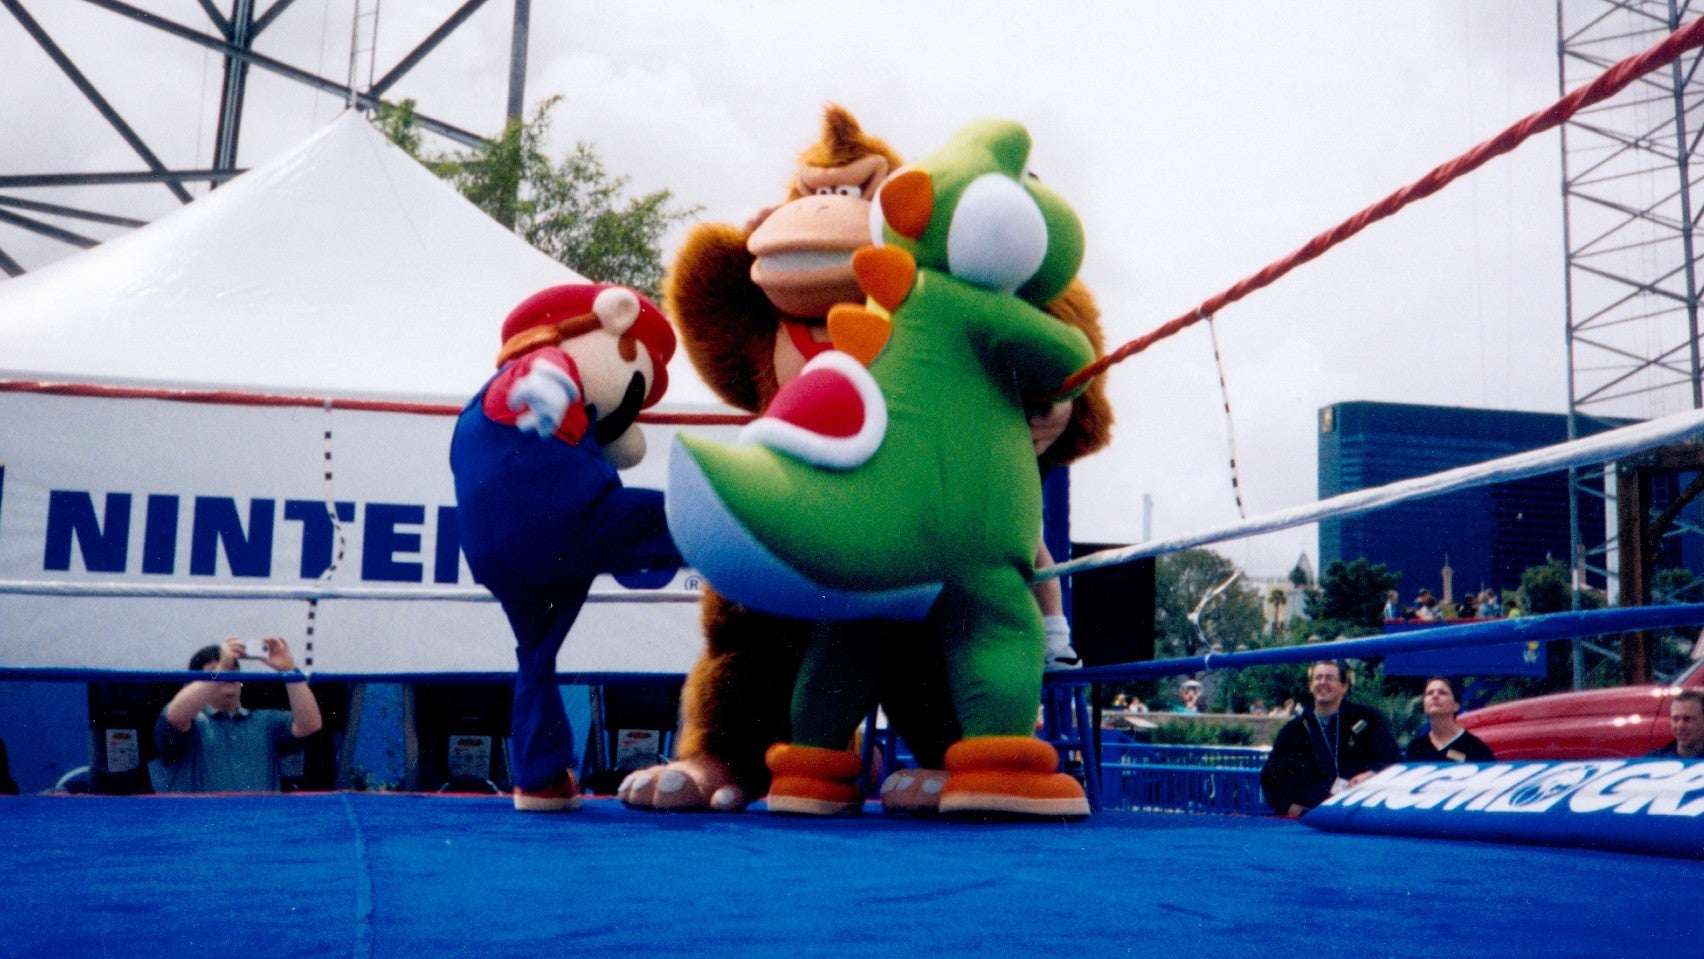 Image for Want to see a real-life wrestling match between Mario, Yoshi and Donkey Kong?